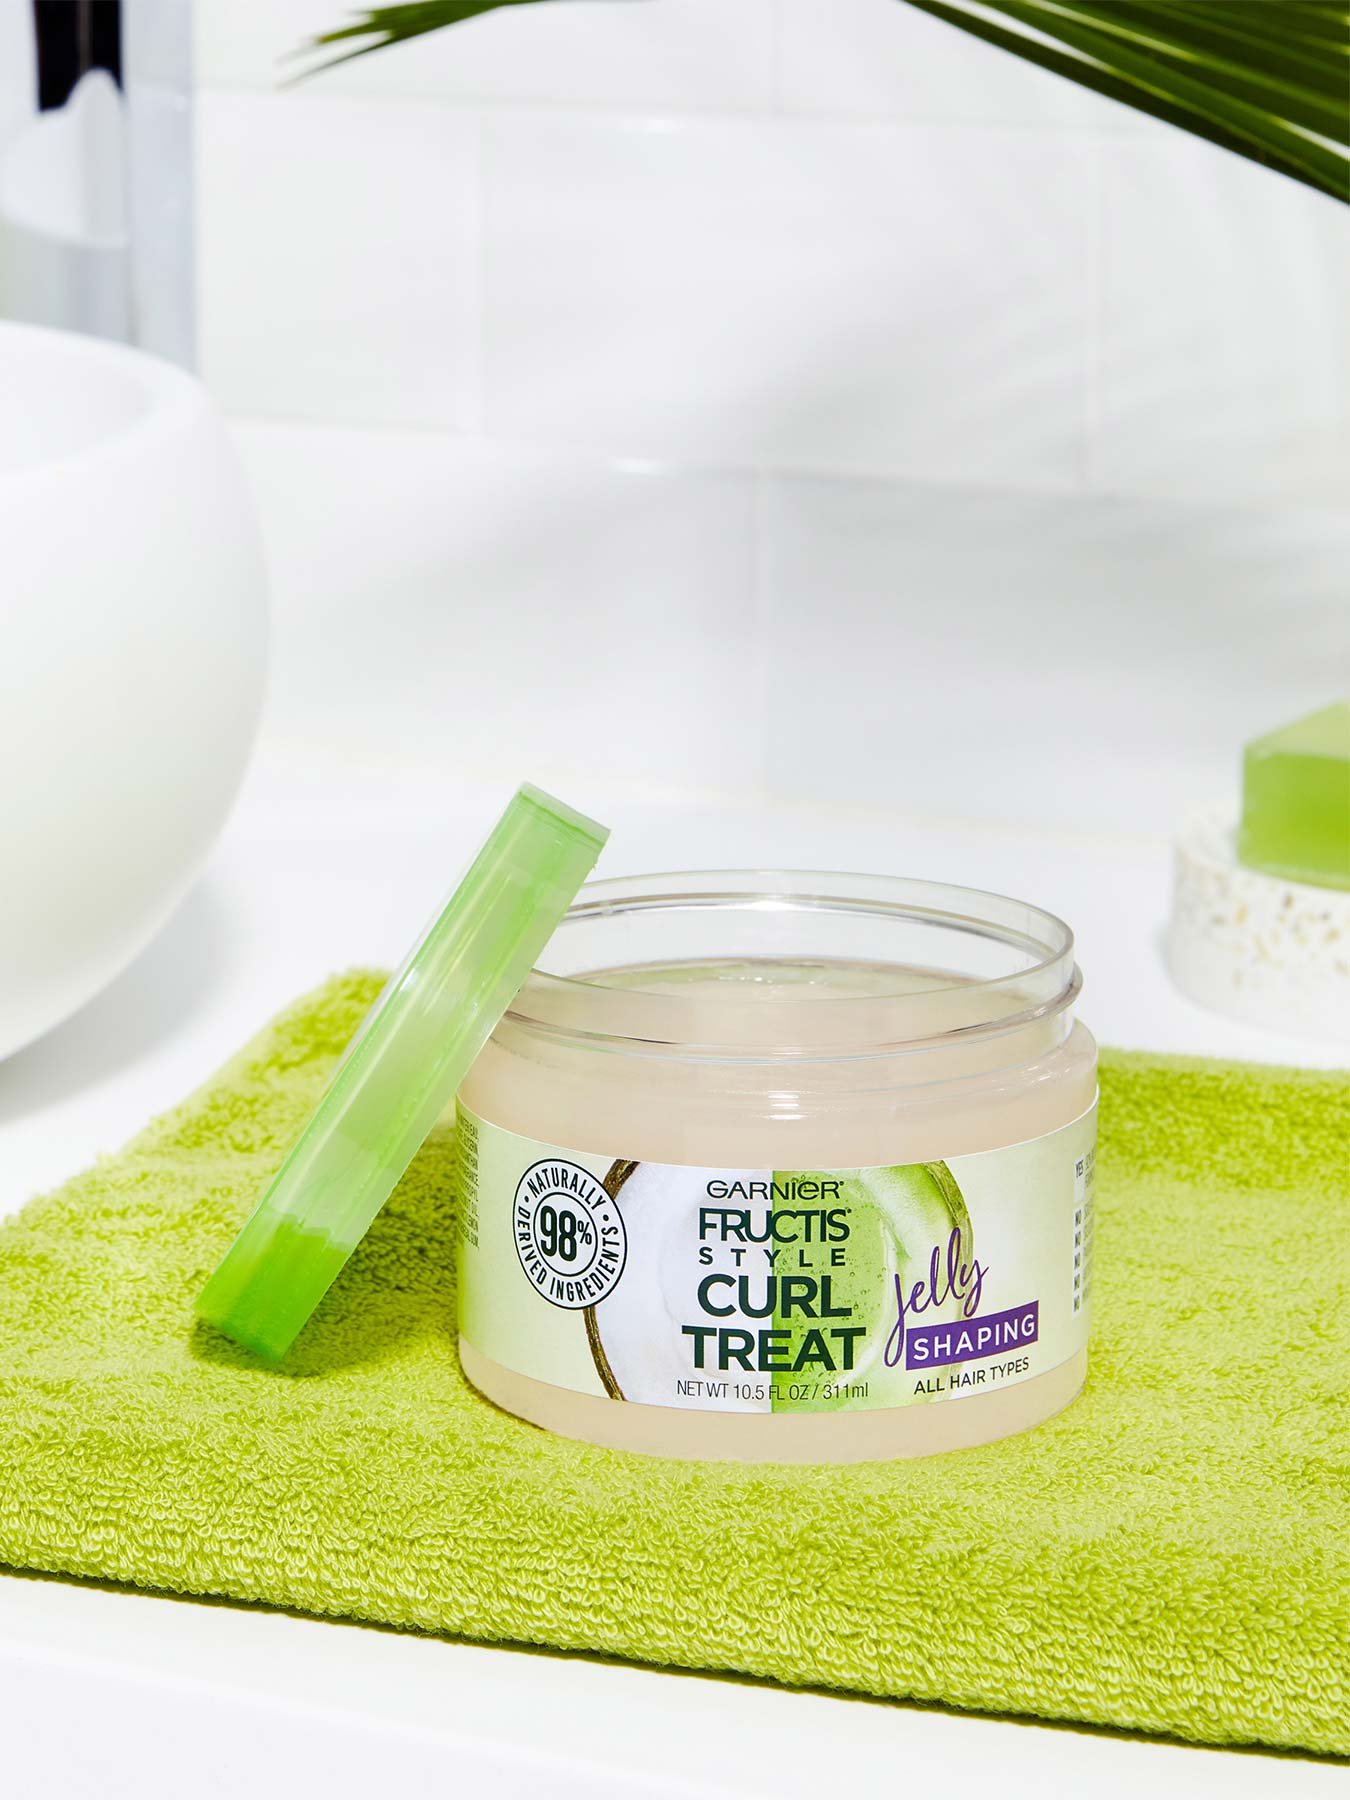 Open container of Curl Treat Jelly Shaping Leave-in Styler to Shape Curls on a green mat in a white bathroom with a plant.